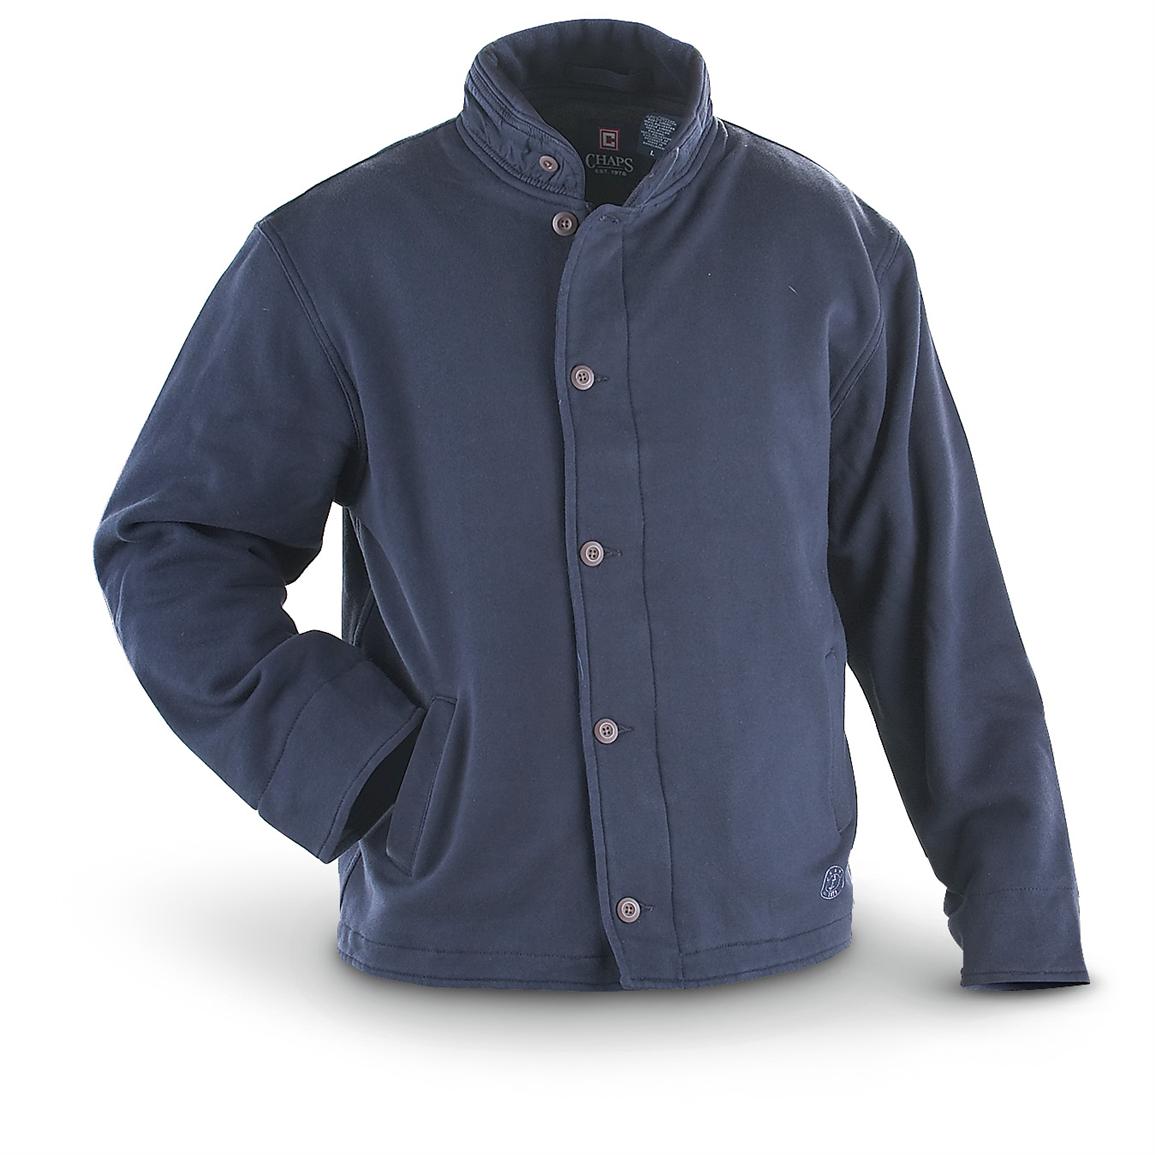 Chaps® Fleece Jacket - 174170, Shirts at Sportsman's Guide